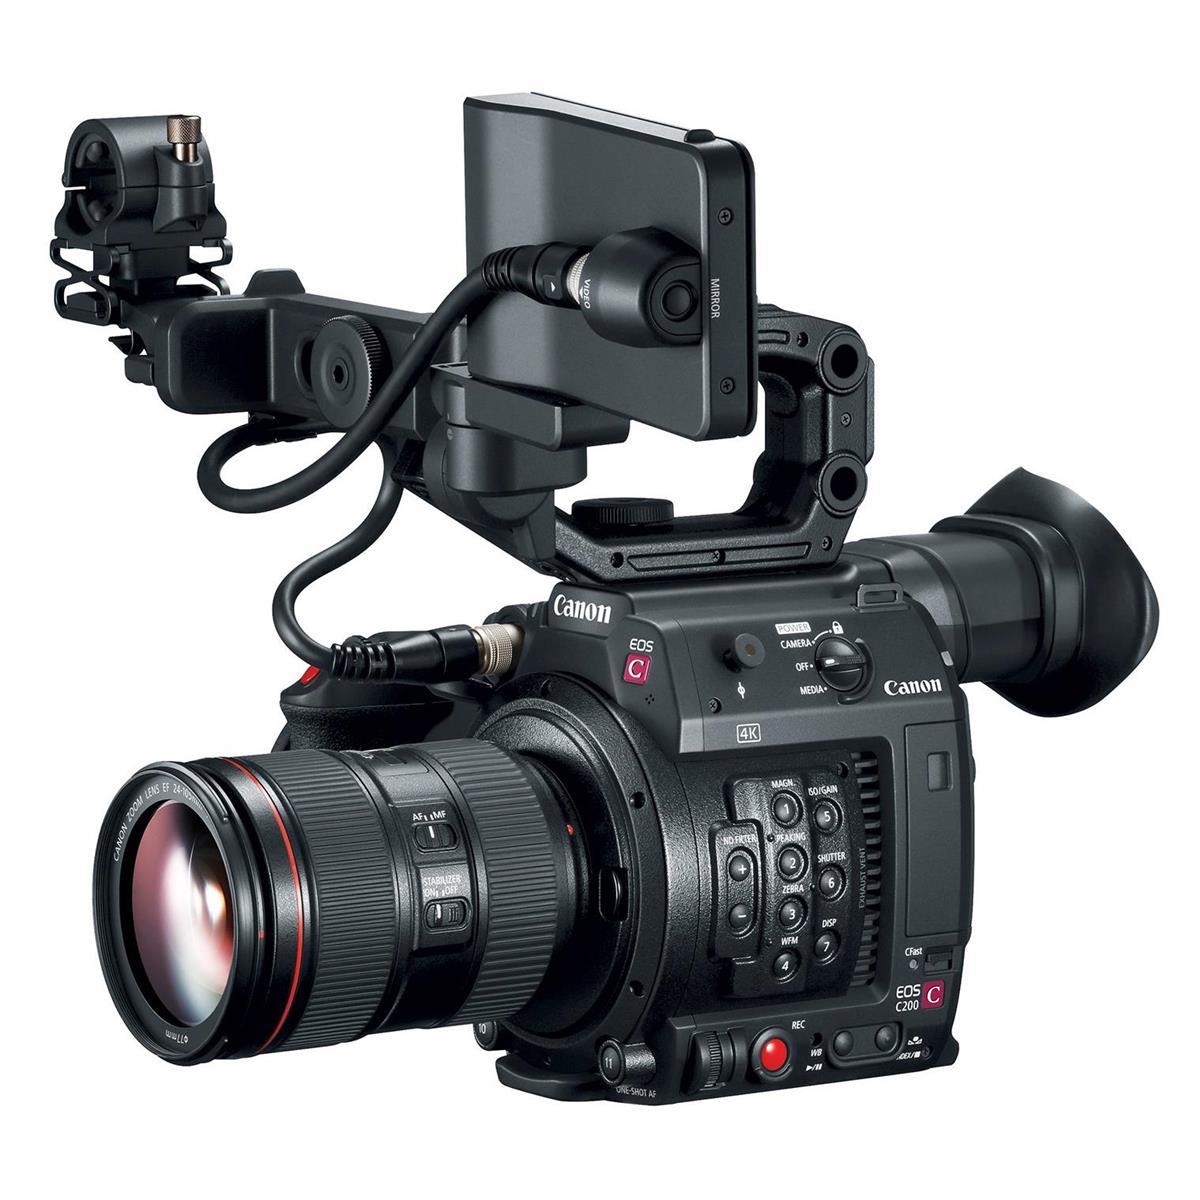 Image of Canon EOS C200 EF Cinema Camera with 24-105mm Lens